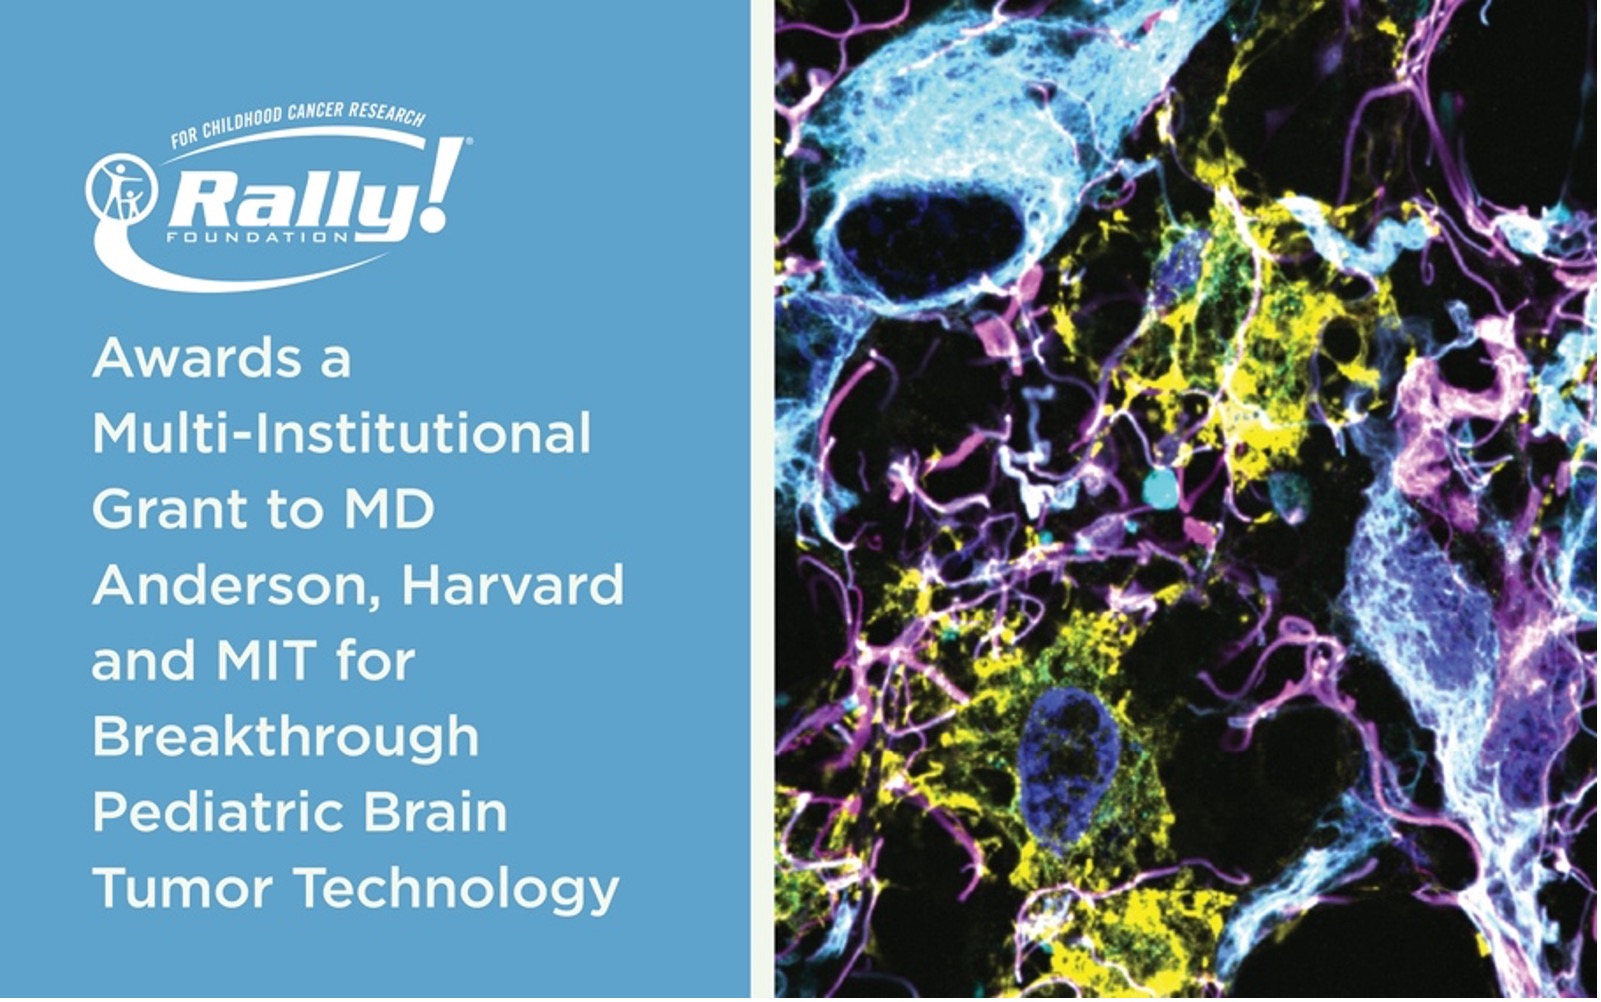 Rally Foundation for Childhood Cancer Research Awards a Multi-Institutional Grant to MD Anderson, Harvard and MIT for Breakthrough Pediatric Brain Tumor Technology